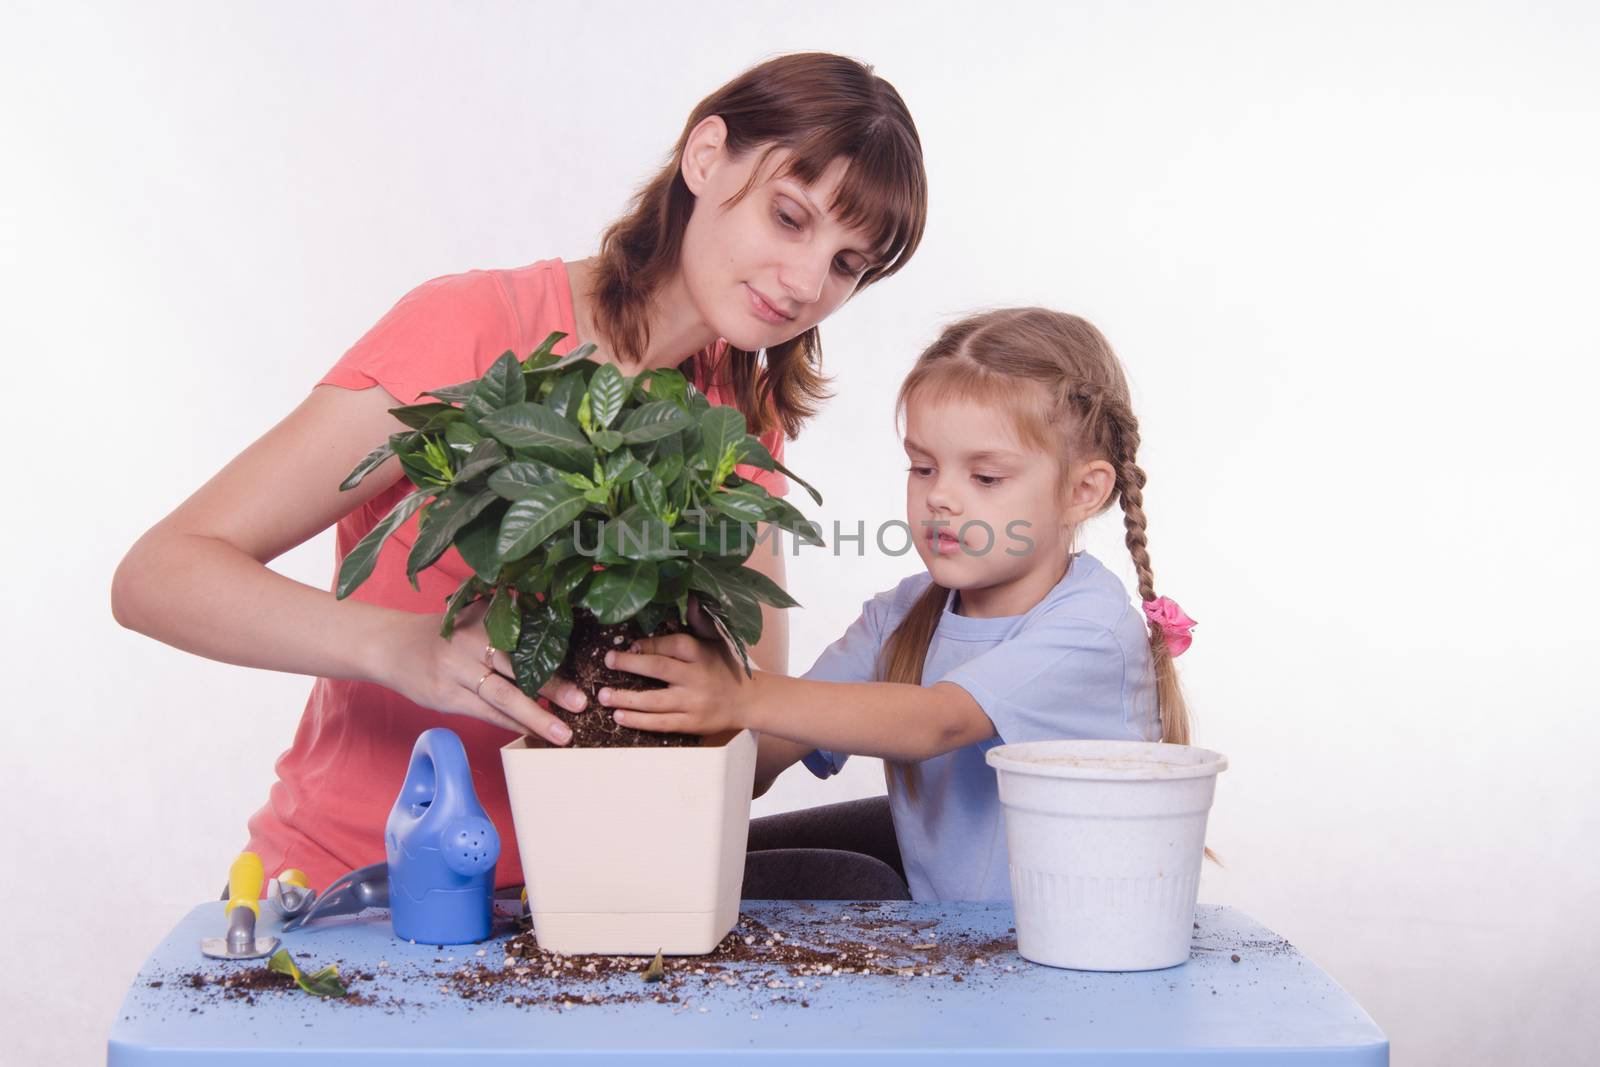 Mom and daughter flower transplanted from pot to other by Madhourse